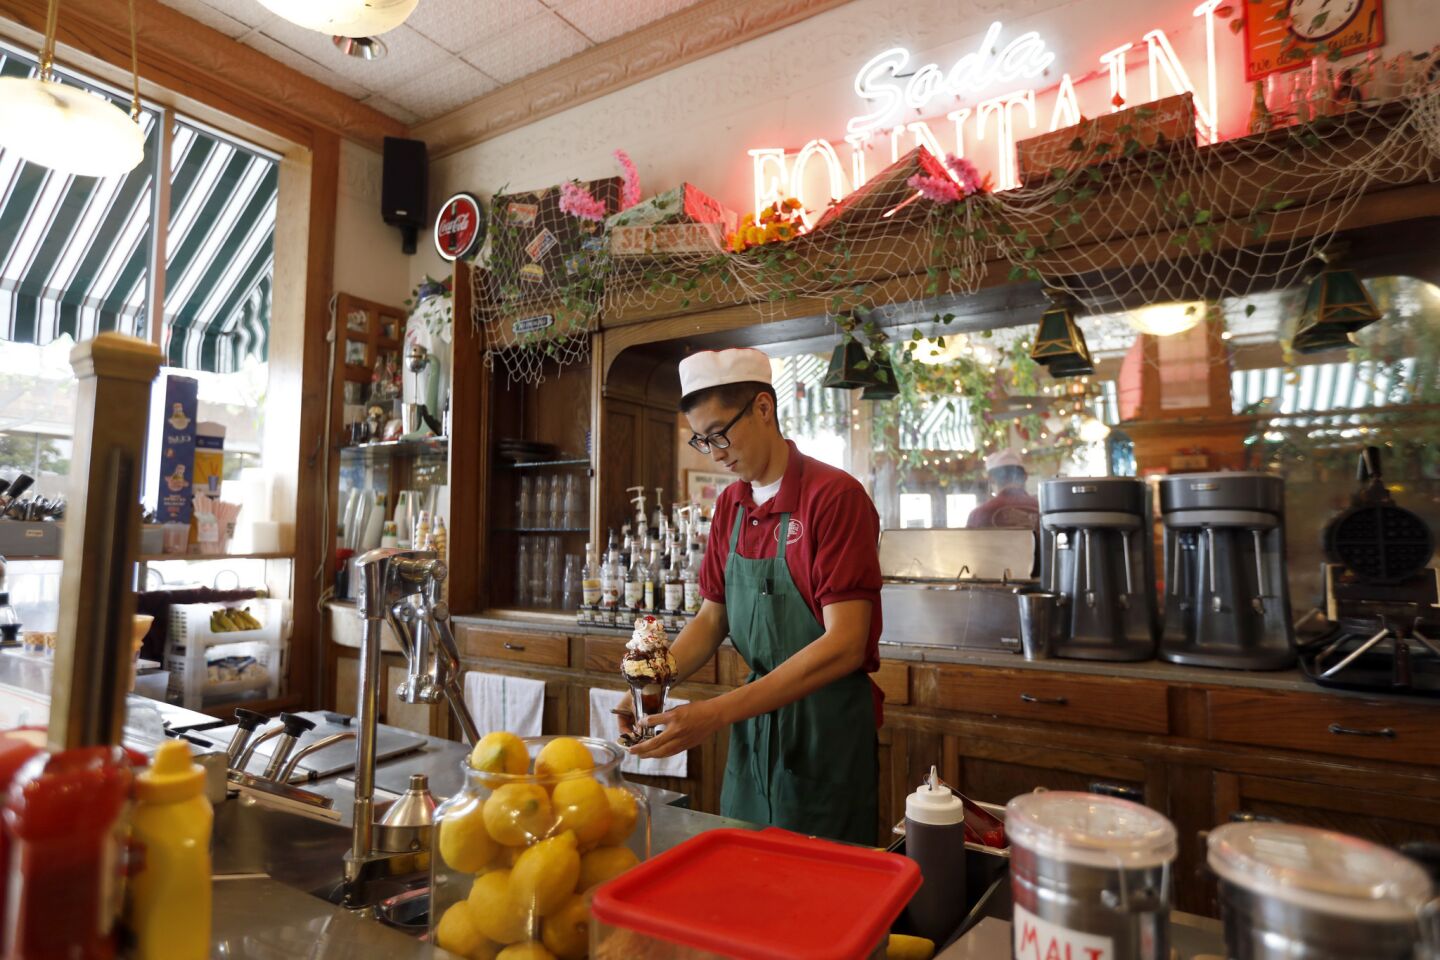 SOUTH PASADENA, CA APRIL 11, 2019: Tristan Yi, 24, is making a hot fudge Sunday at the old fashioned soda fountain inside the Fair Oaks Pharmacy in South Pasadena CA April 11, 2019. (Francine Orr/ Los Angeles Times)